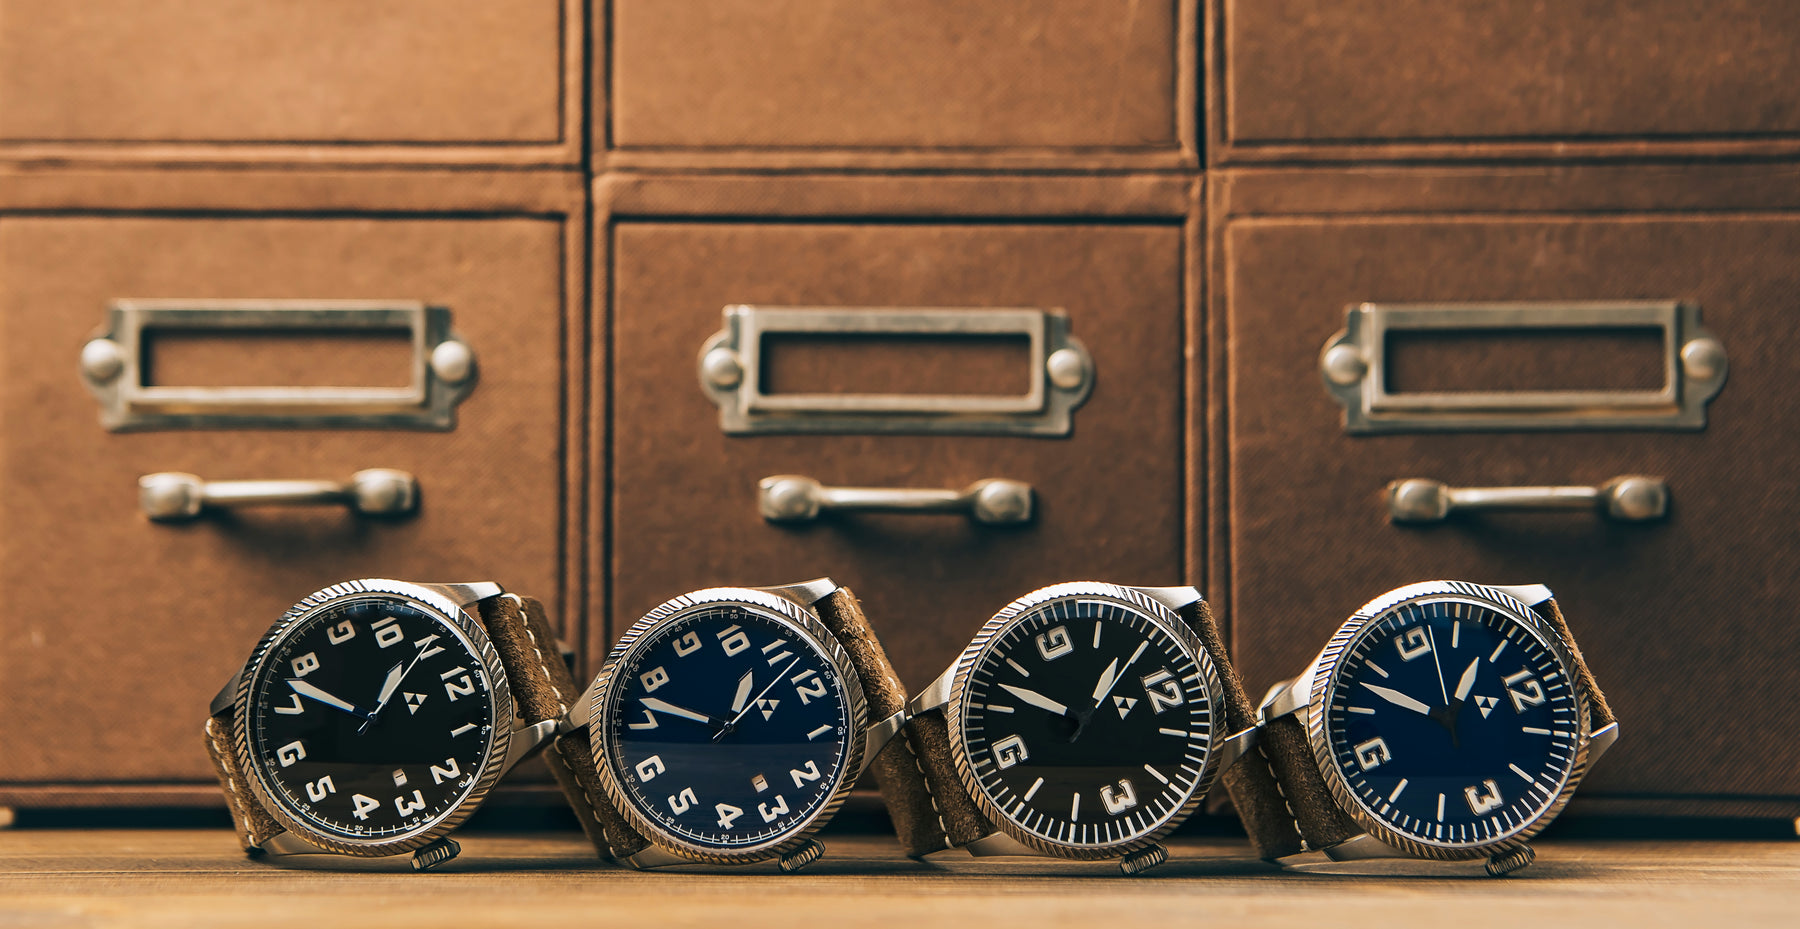 Microbrand Pilot Watches